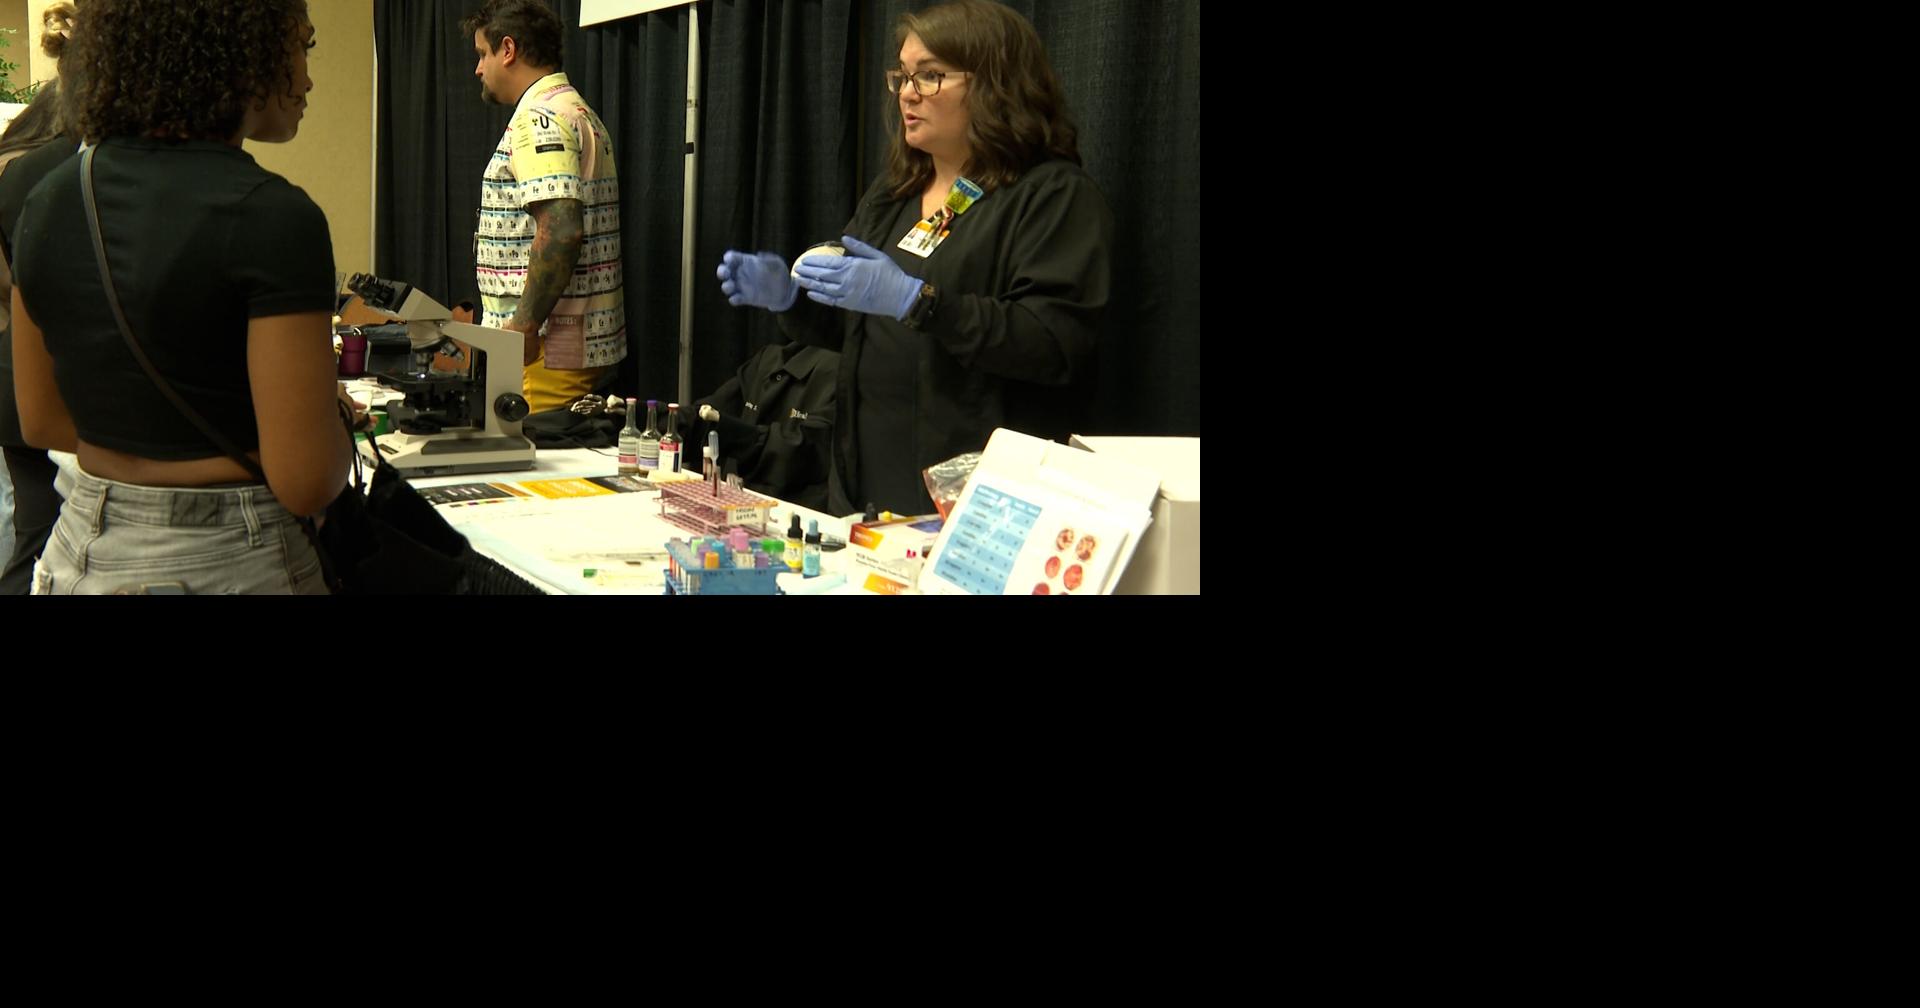 Health care expo introduces professions amongst staffing shortages